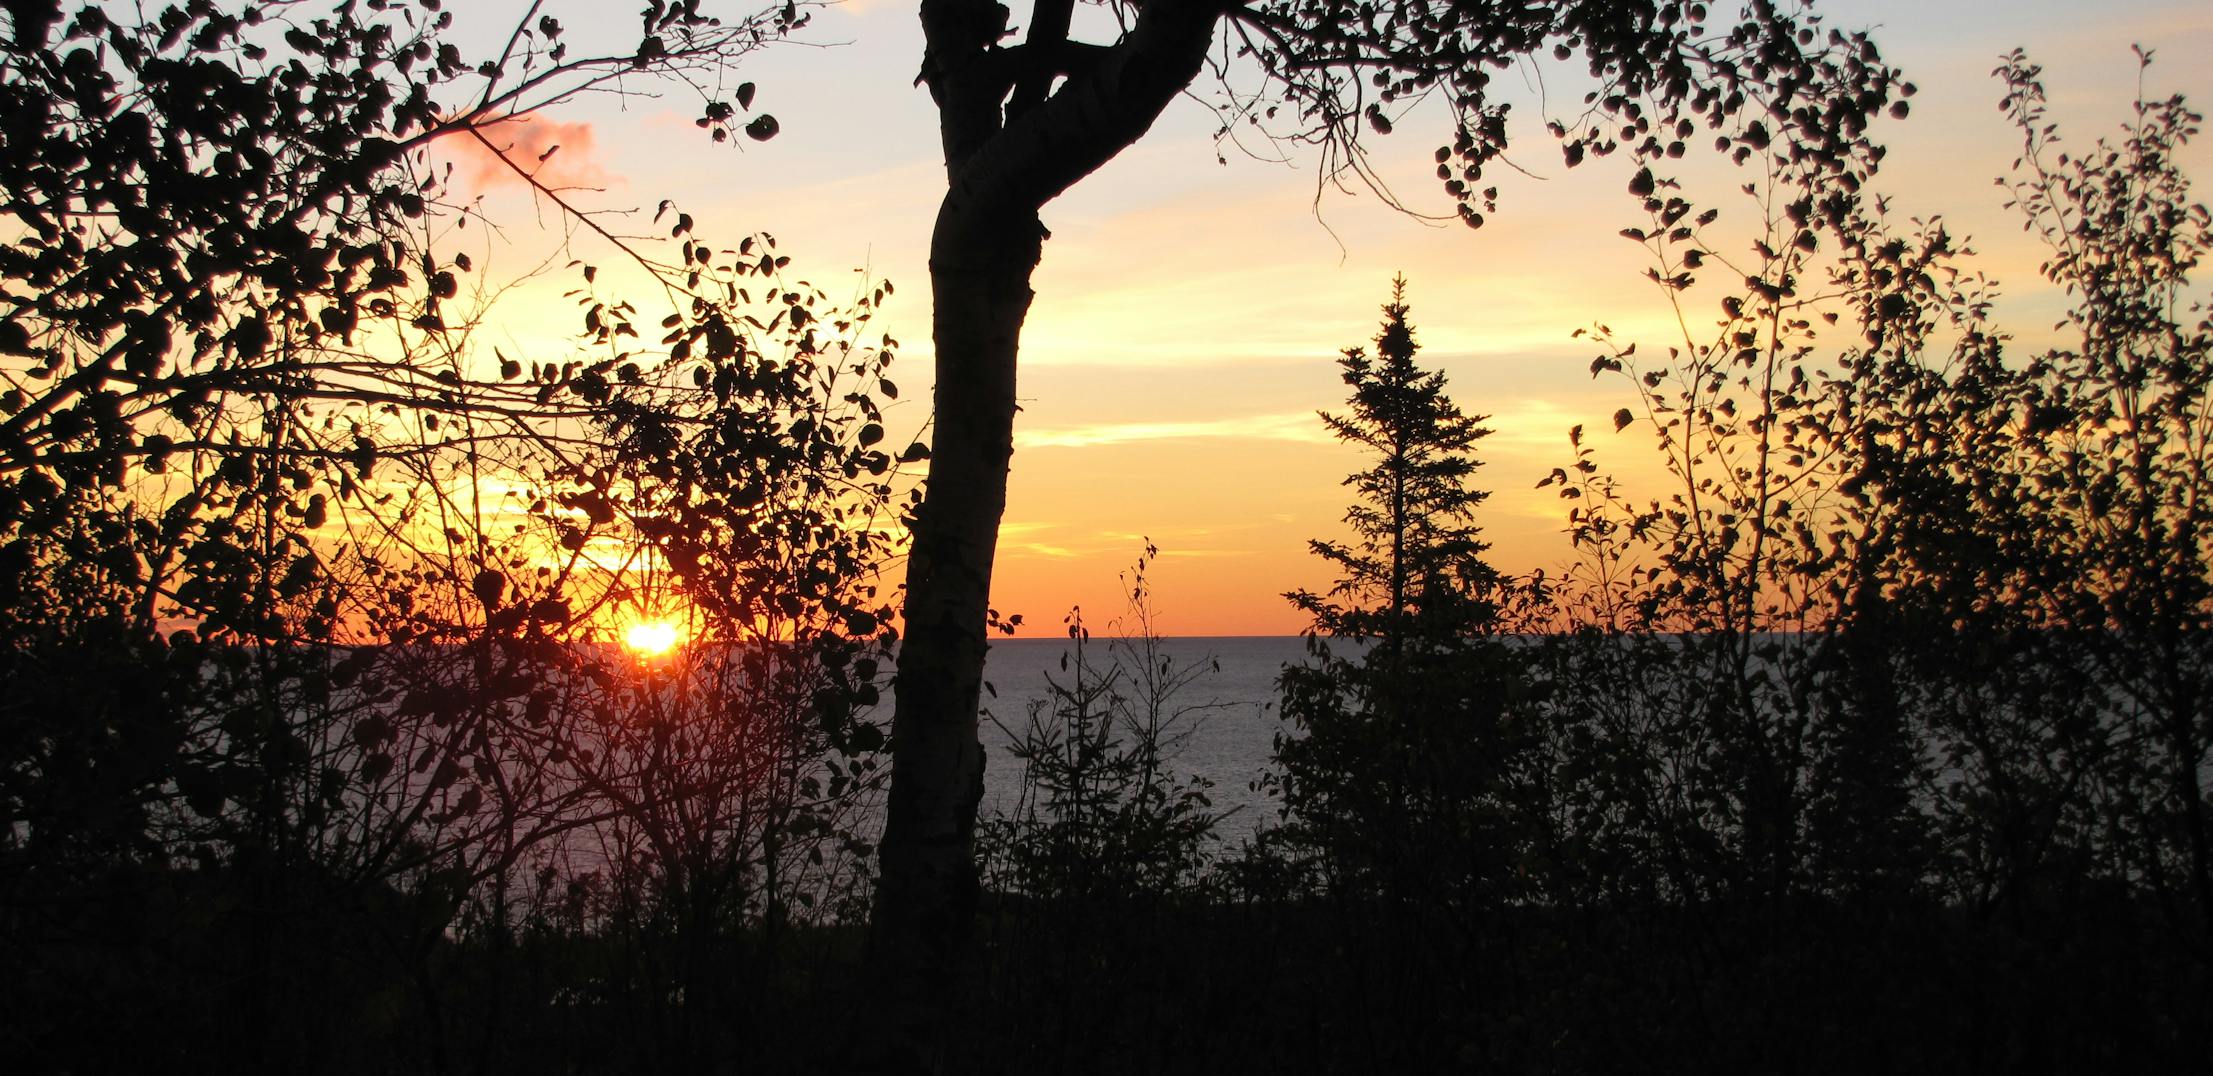 The sun rises over the trees in Superior National Forest.